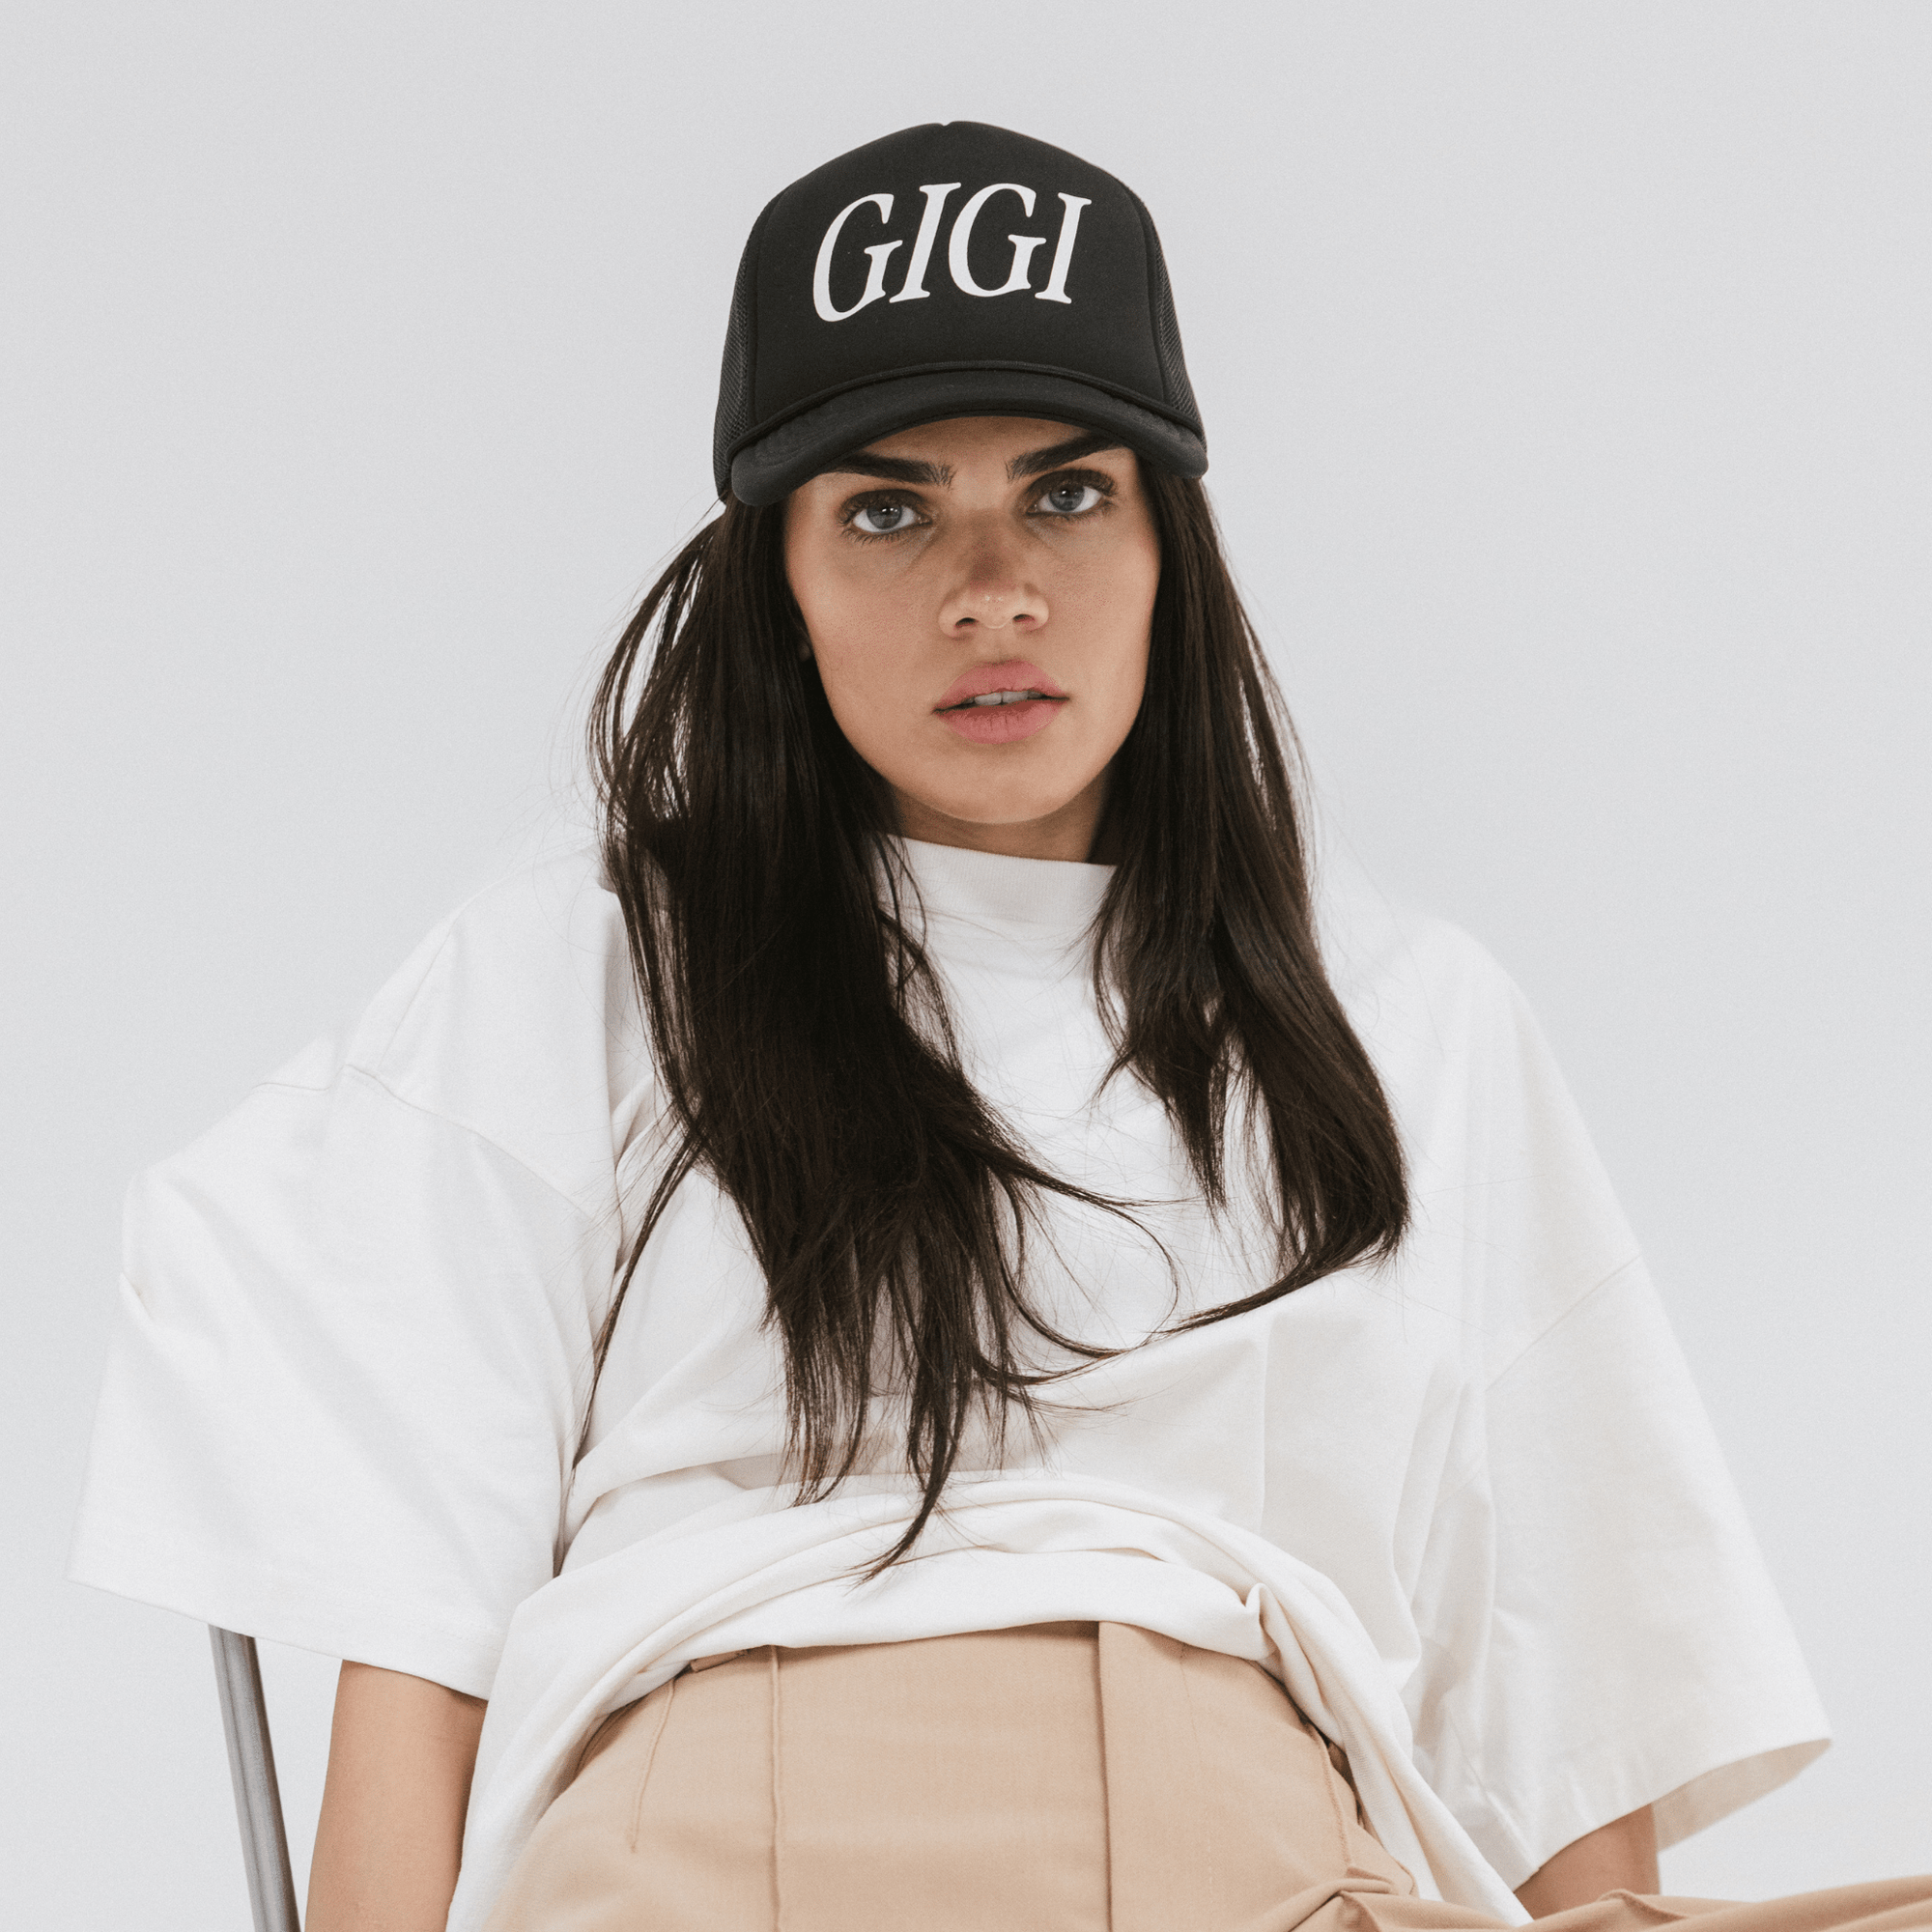 Gigi Pip trucker hats for women - Gigi Foam Trucker Hat - 100% polyester foam + mesh trucker hat with a curved brim featuring the word "Gigi" in a contrasting color as a design across the front panel [black]